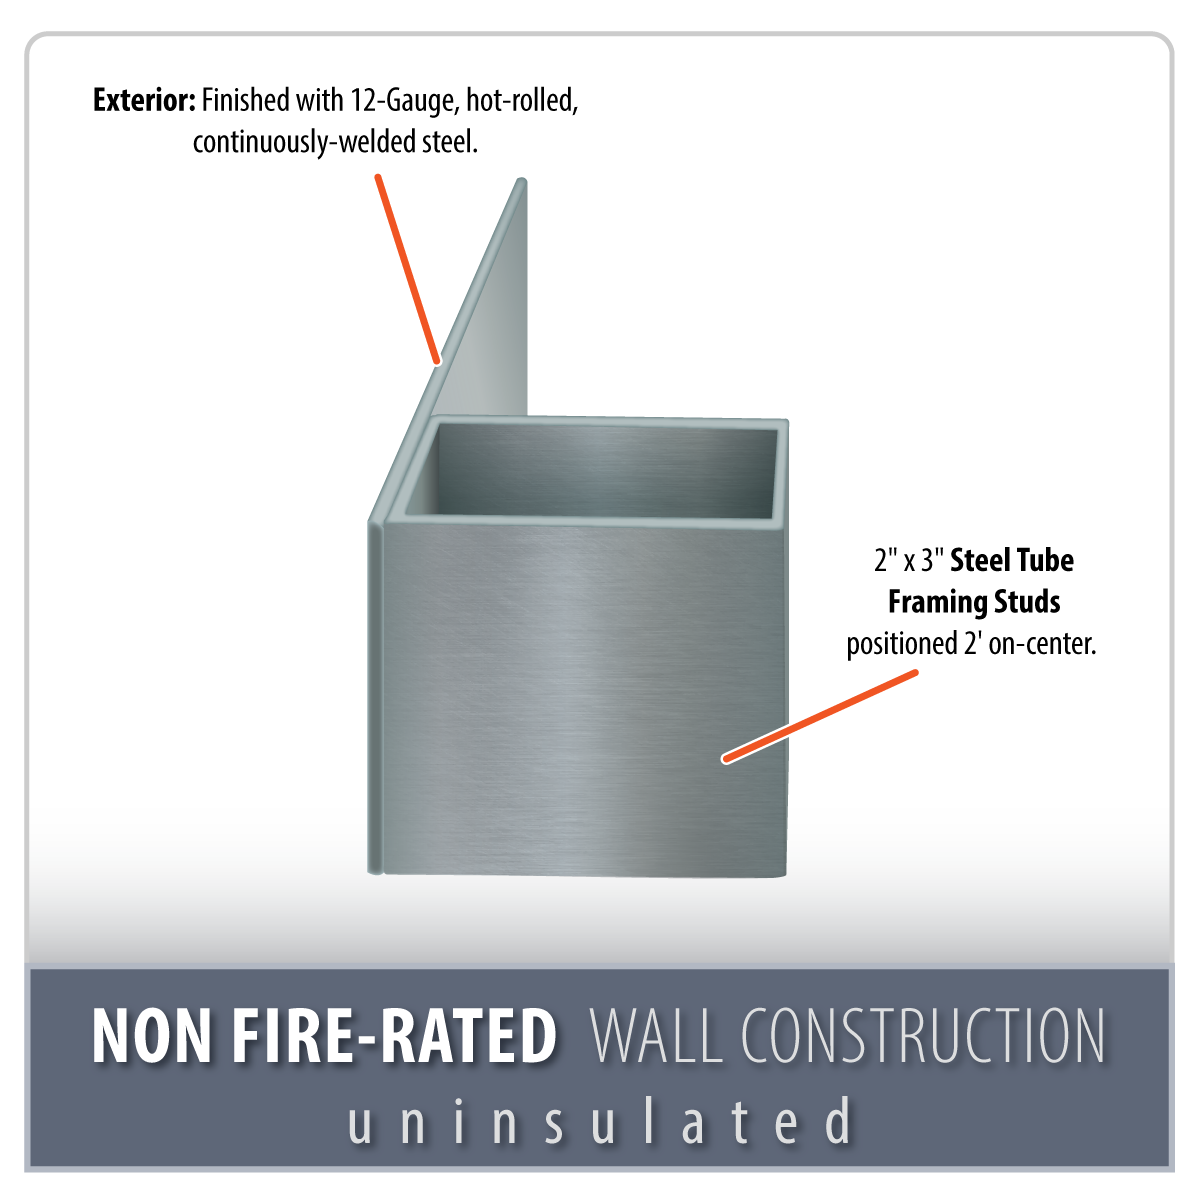 Non Fire-Rated Uninsulated Wall Construction Feature